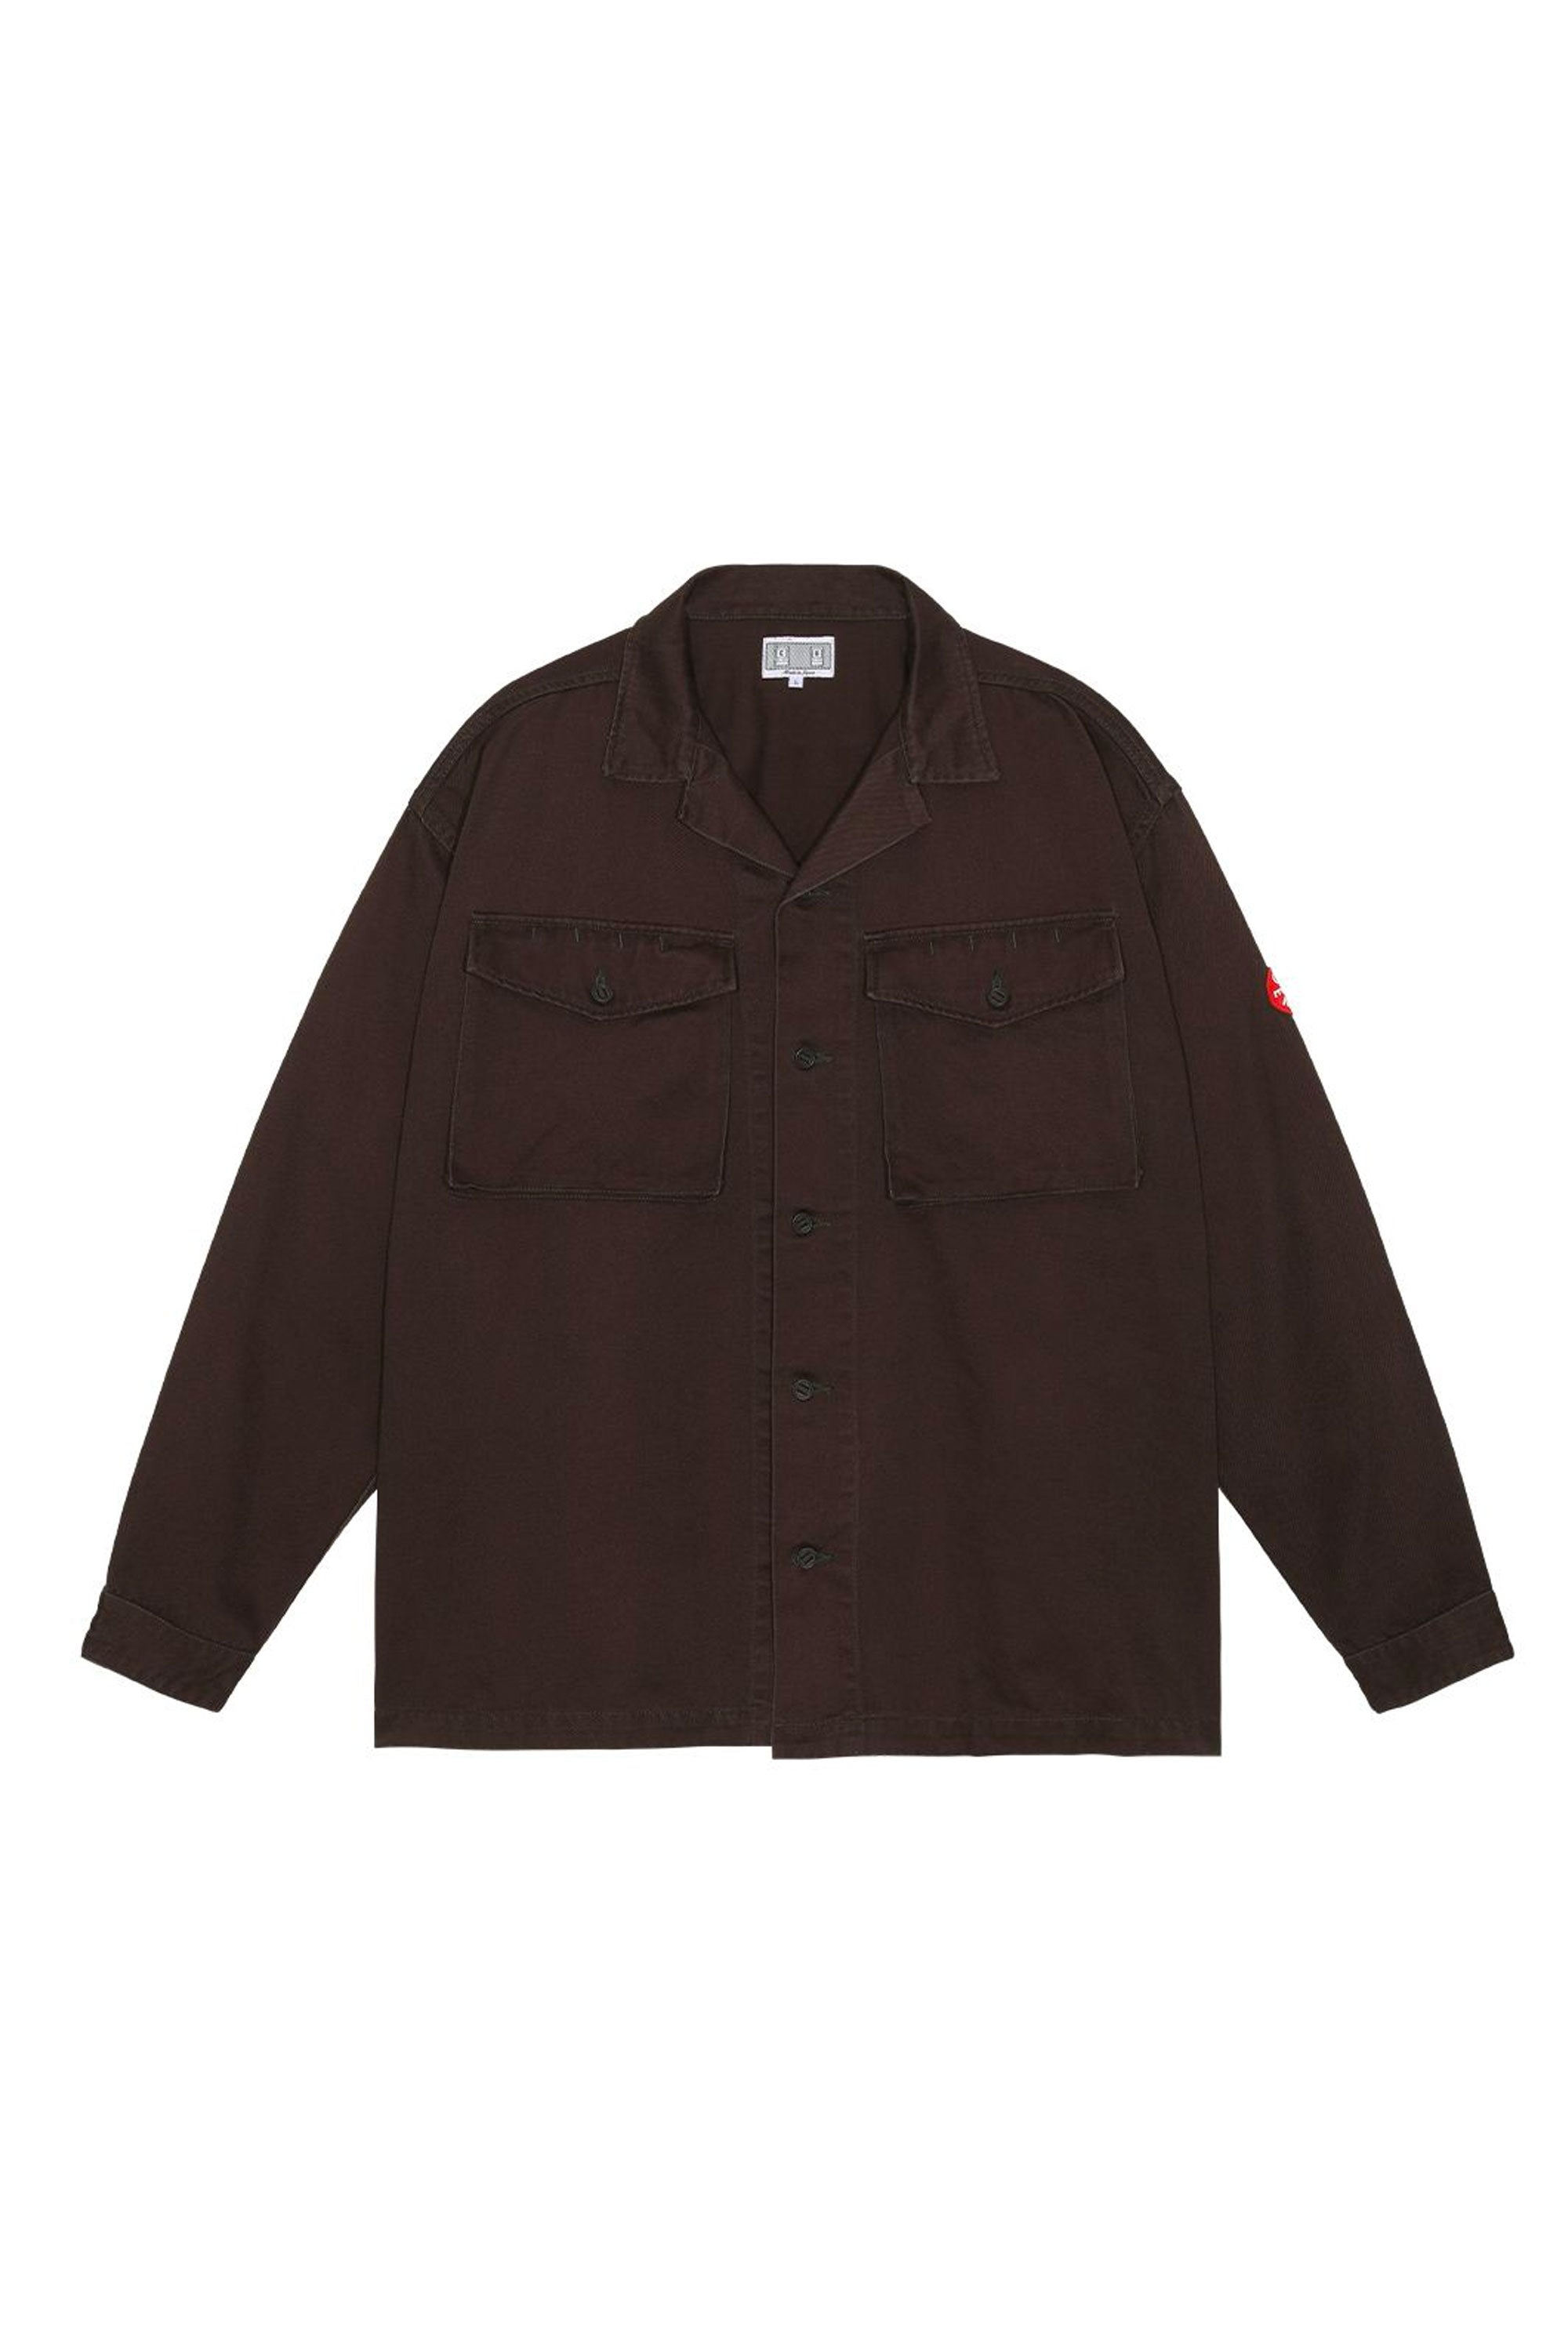 The CAV EMPT - SLOTTED BUTTON BDU  available online with global shipping, and in PAM Stores Melbourne and Sydney.